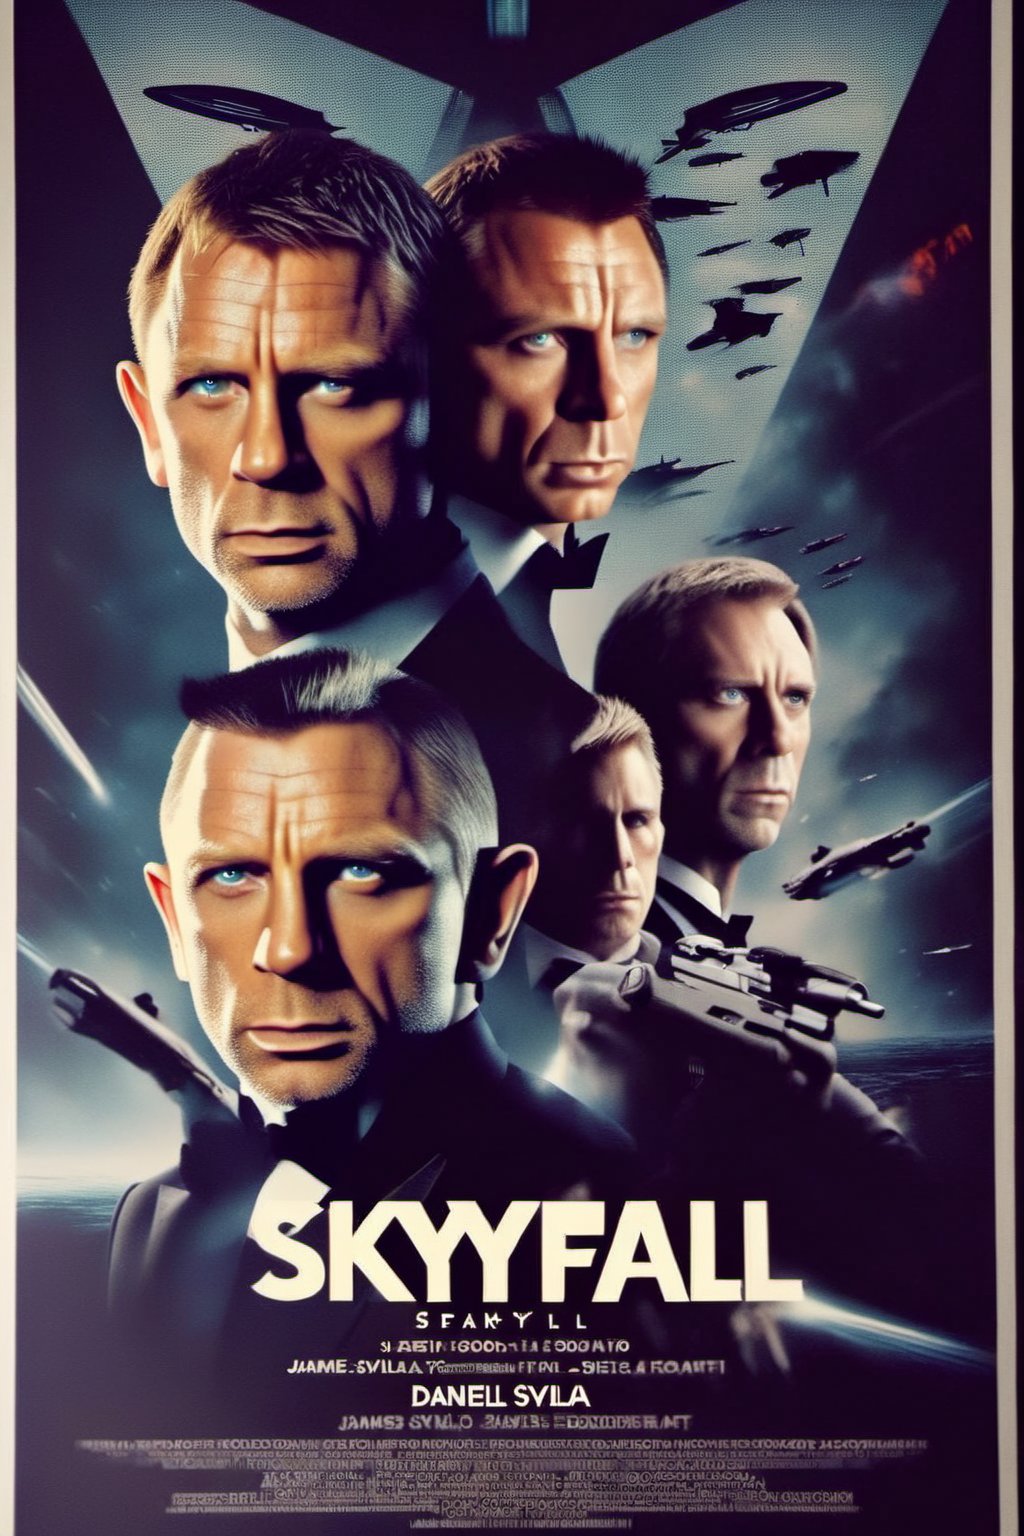 Movie poster, Skyfall is the twenty-third film in the James Bond series, It features Daniel Craig's third performance as James Bond, and Javier Bardem as Raoul Silva, the film's antagonist. text at bottom says "Skyfall" in sci-fi font